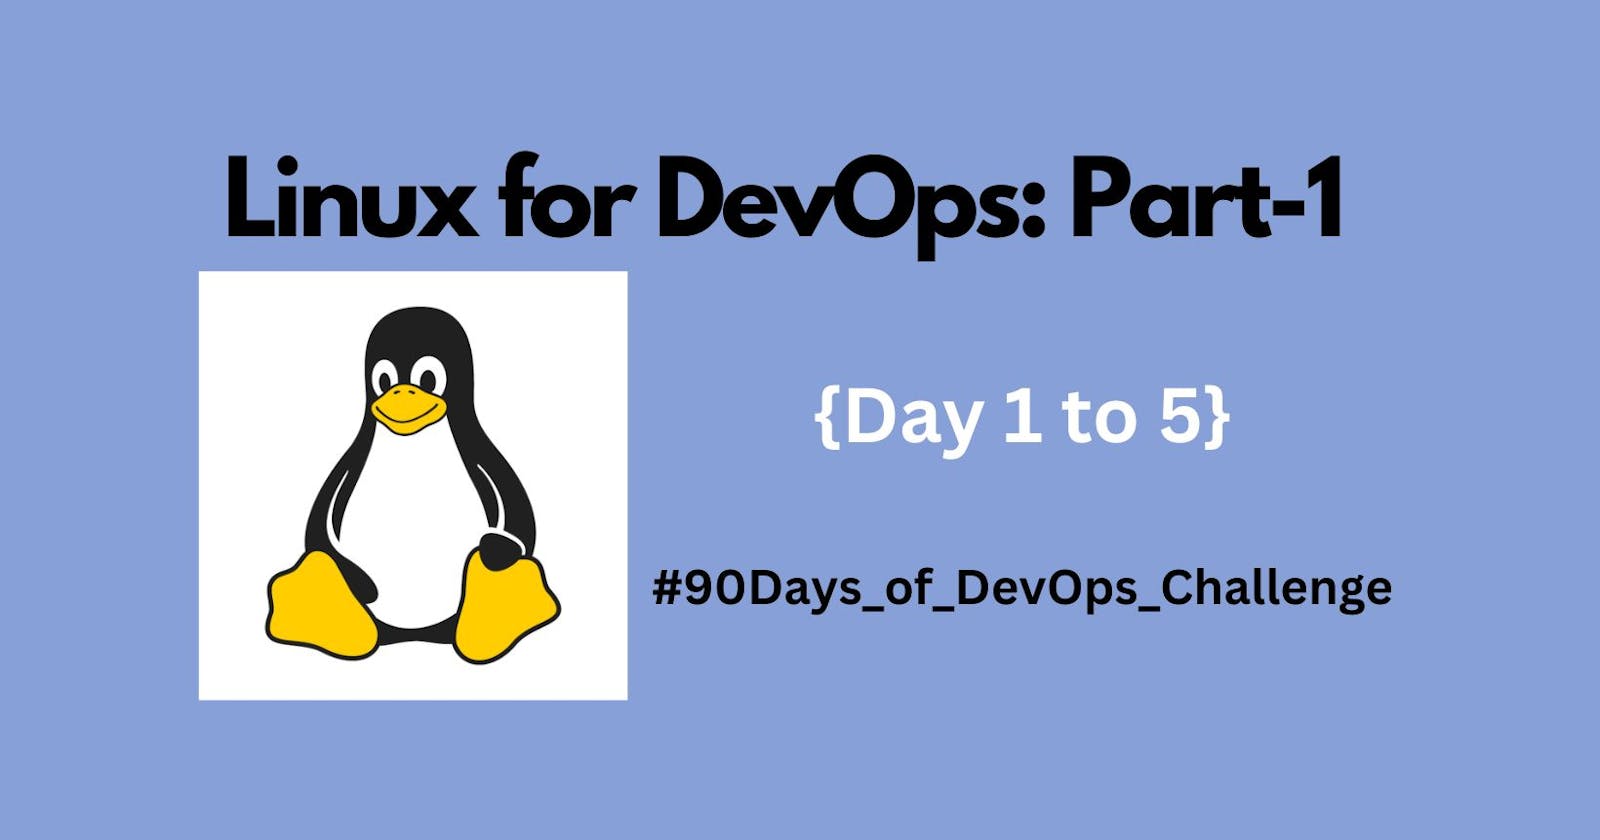 Linux for DevOps: Part-1 (Day1 to 5)